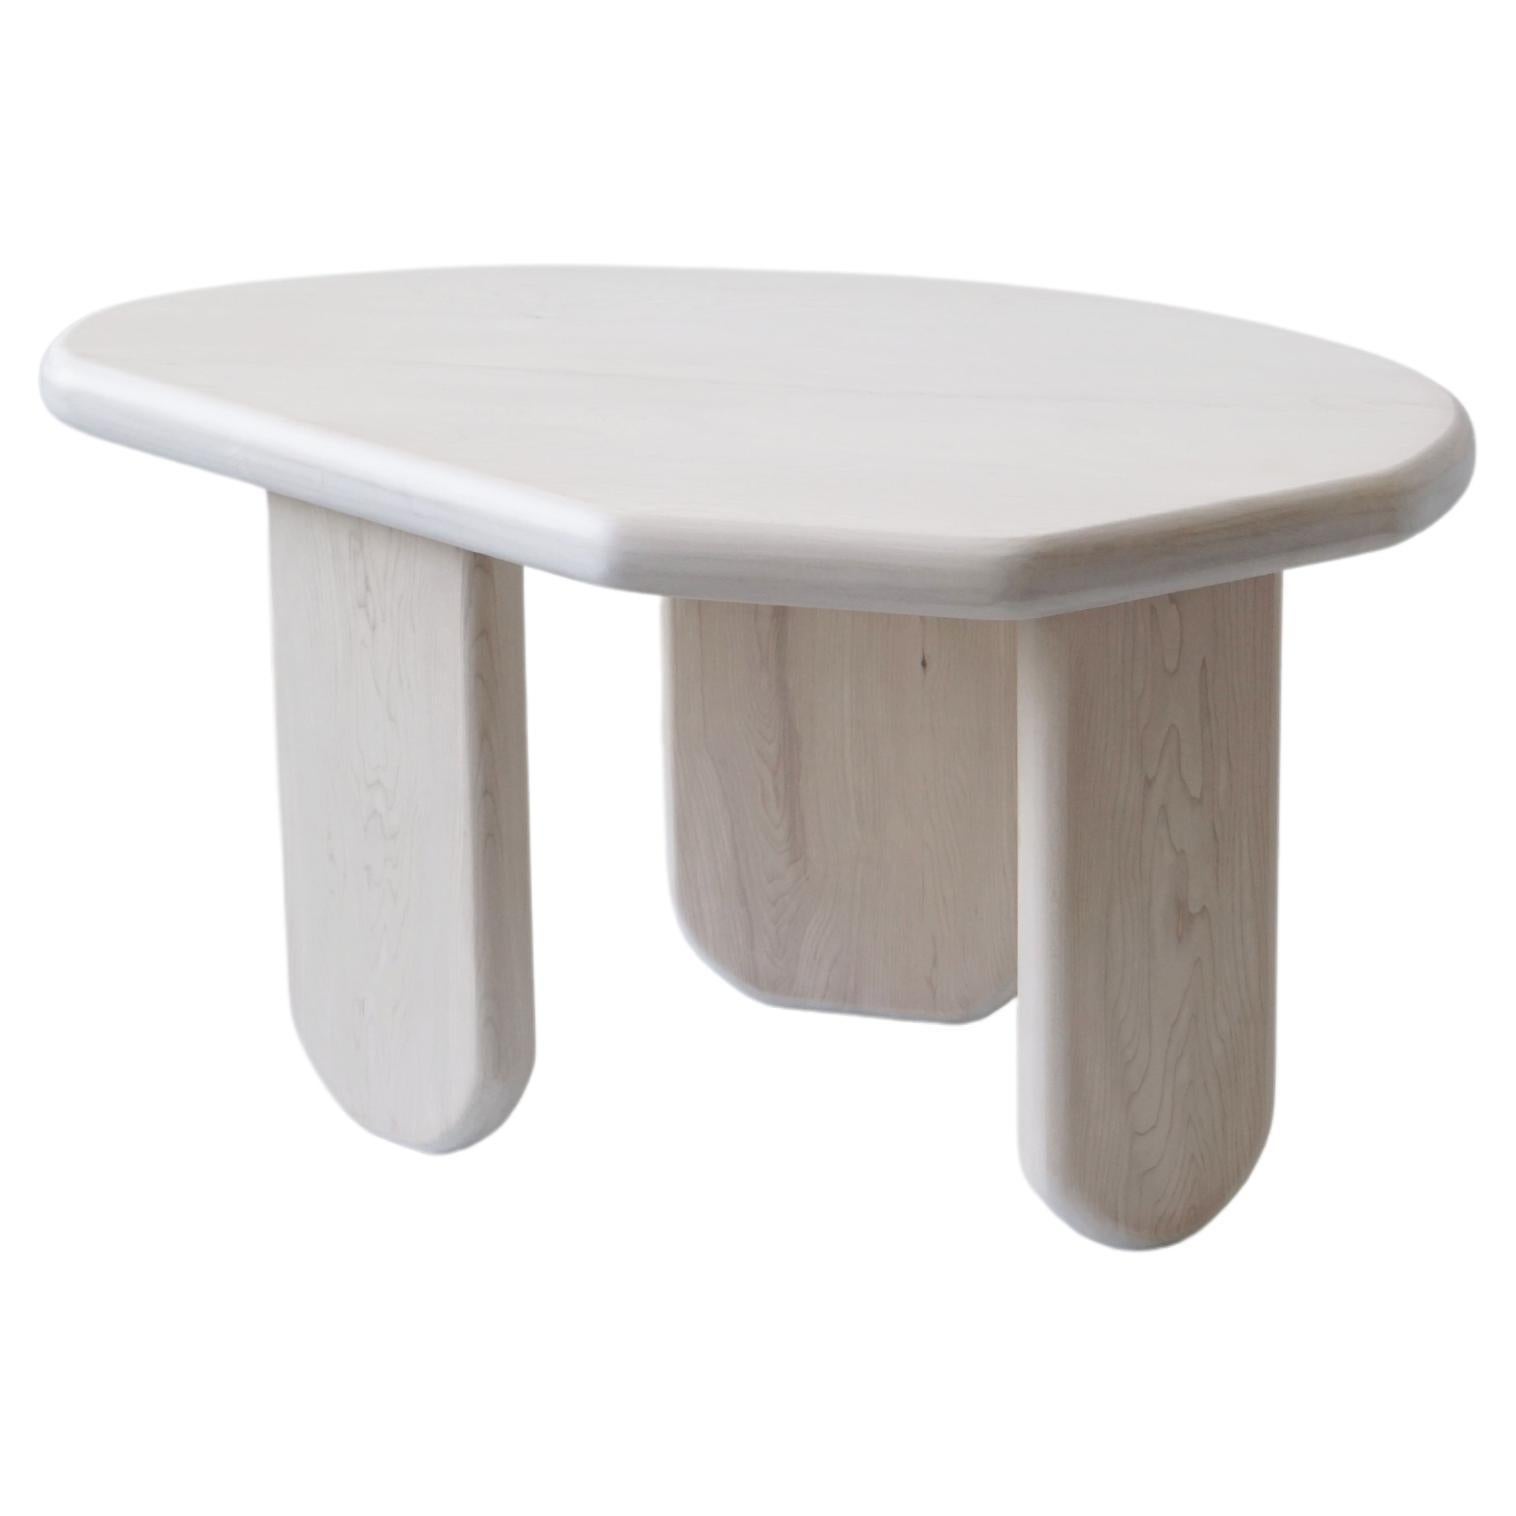 Bleached Maple Organic Shaped Table by Last Workshop, 2023